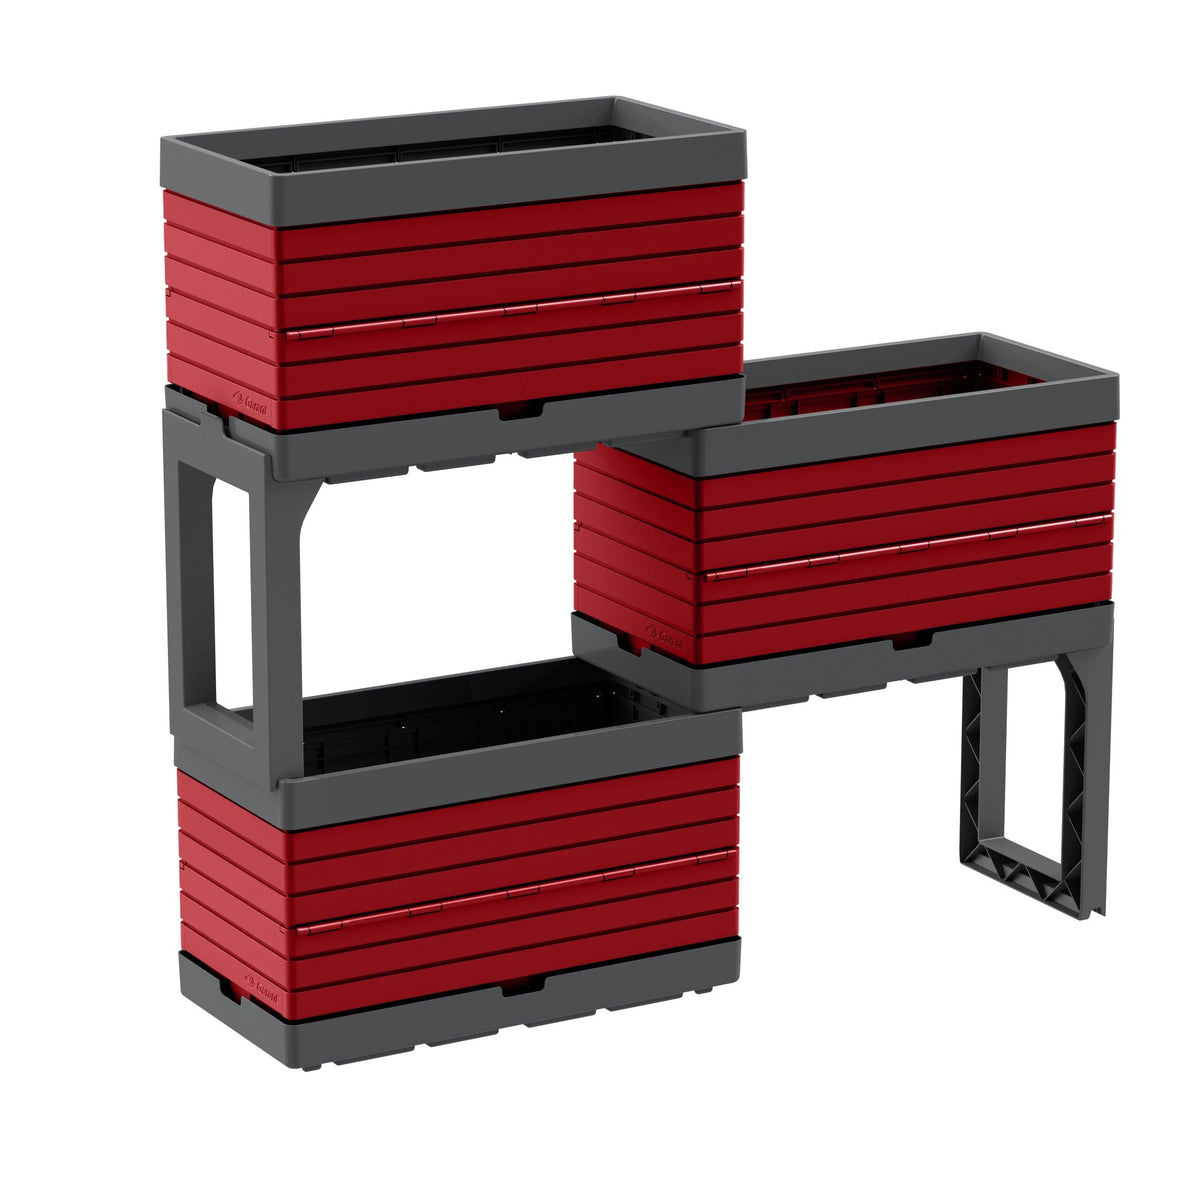 Modular Garden Kit of 3 Containers Red